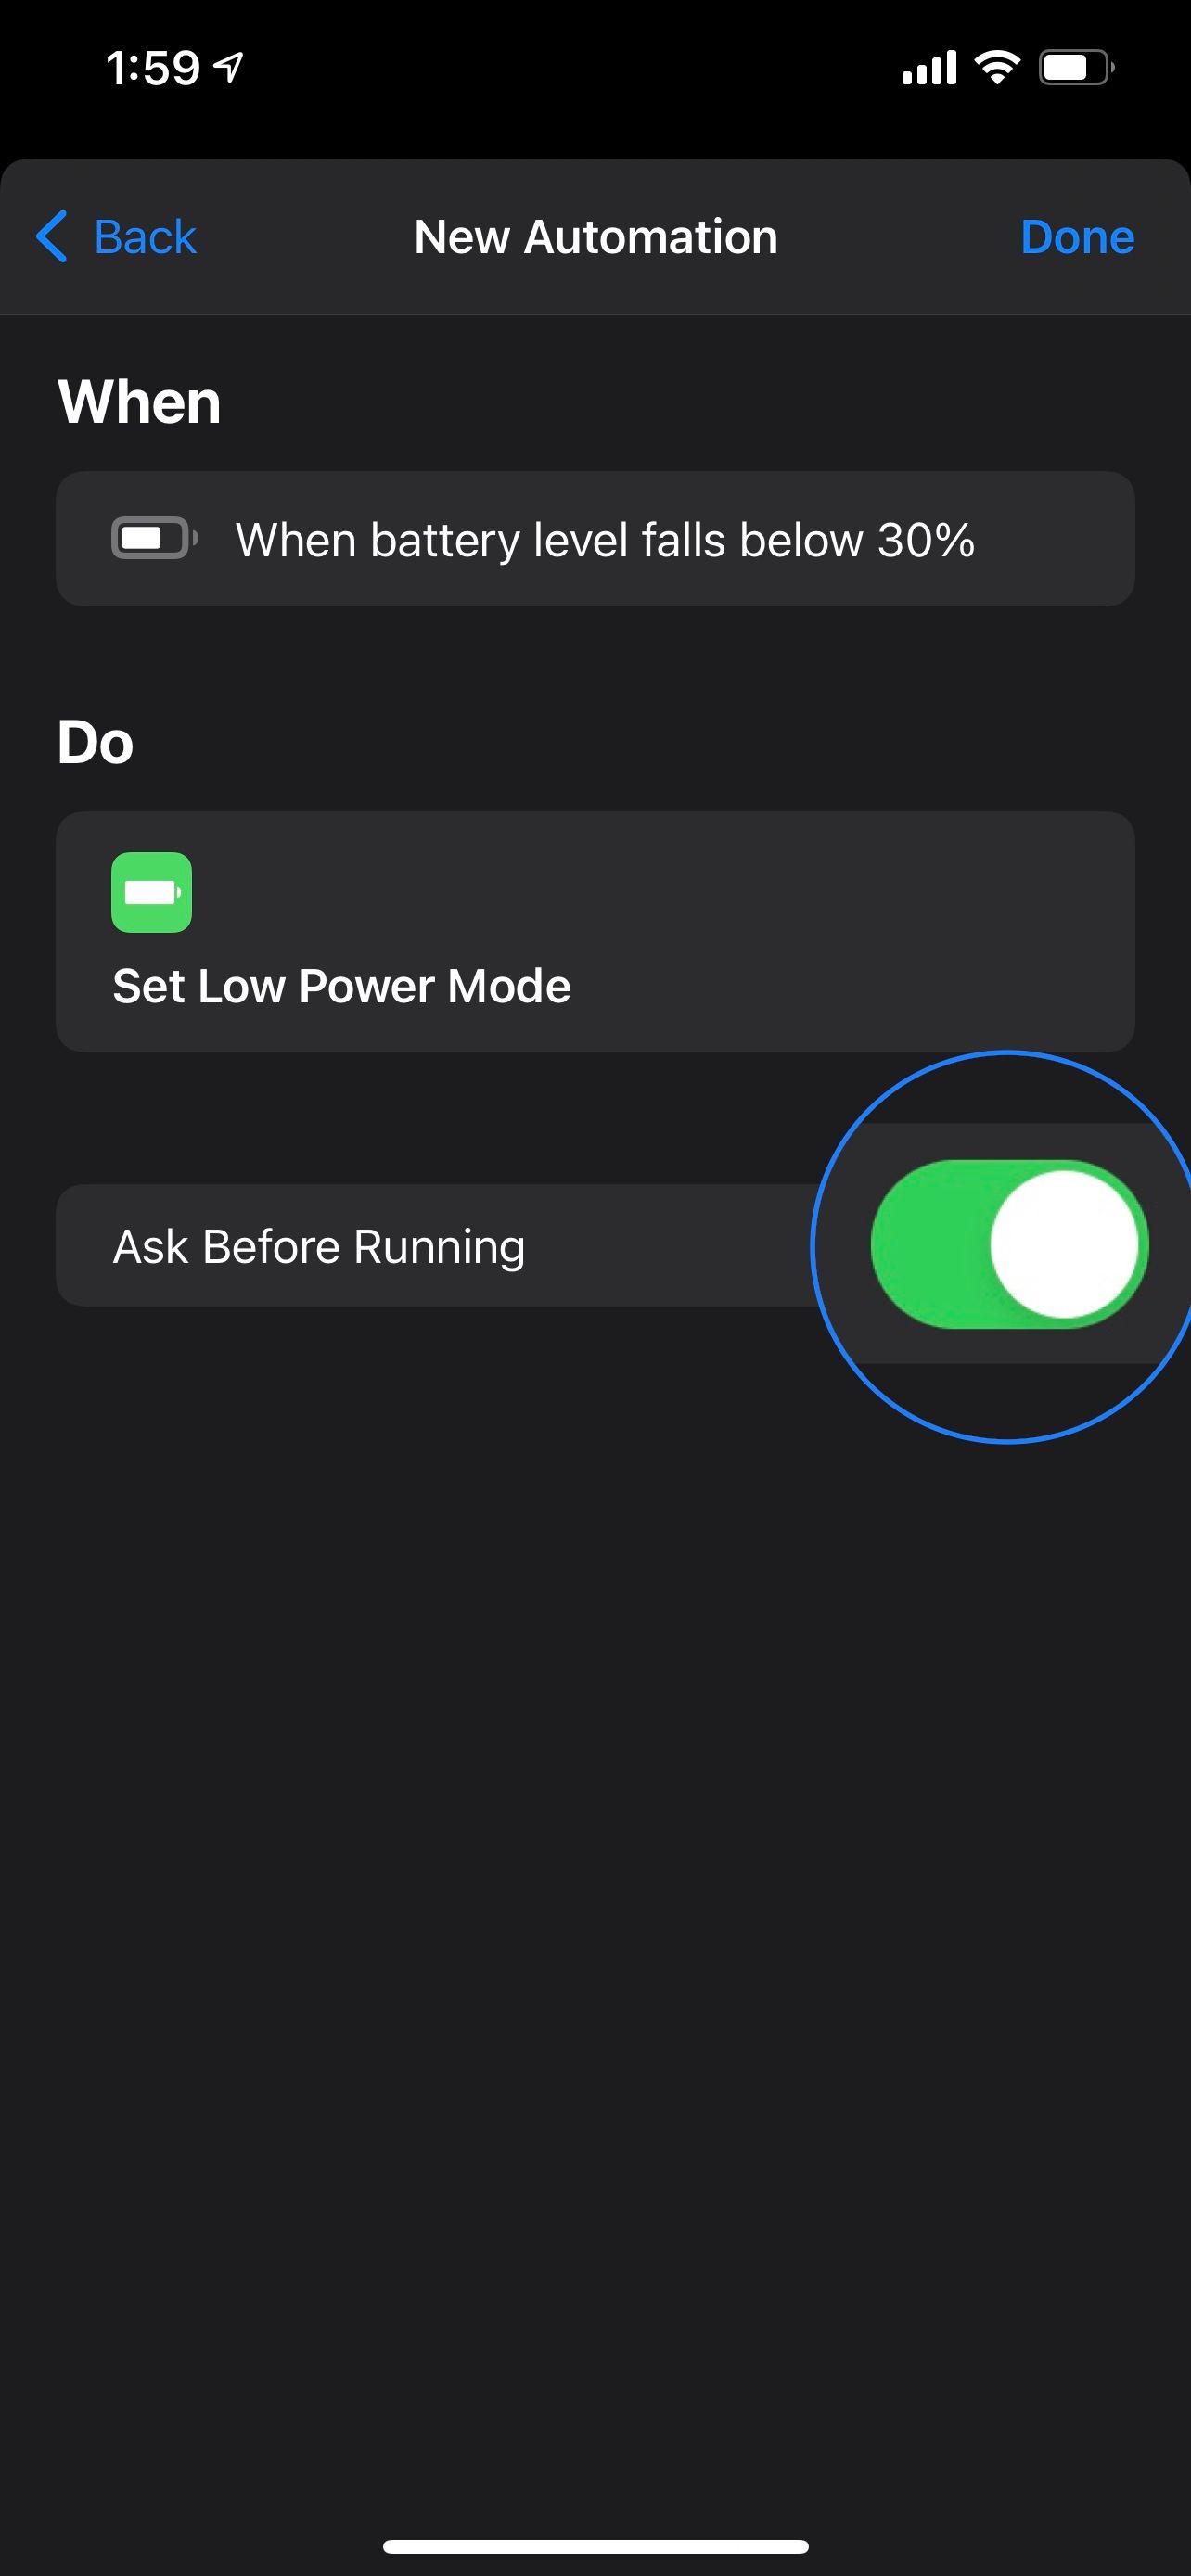 Automation Ask Before Running toggle highlighted